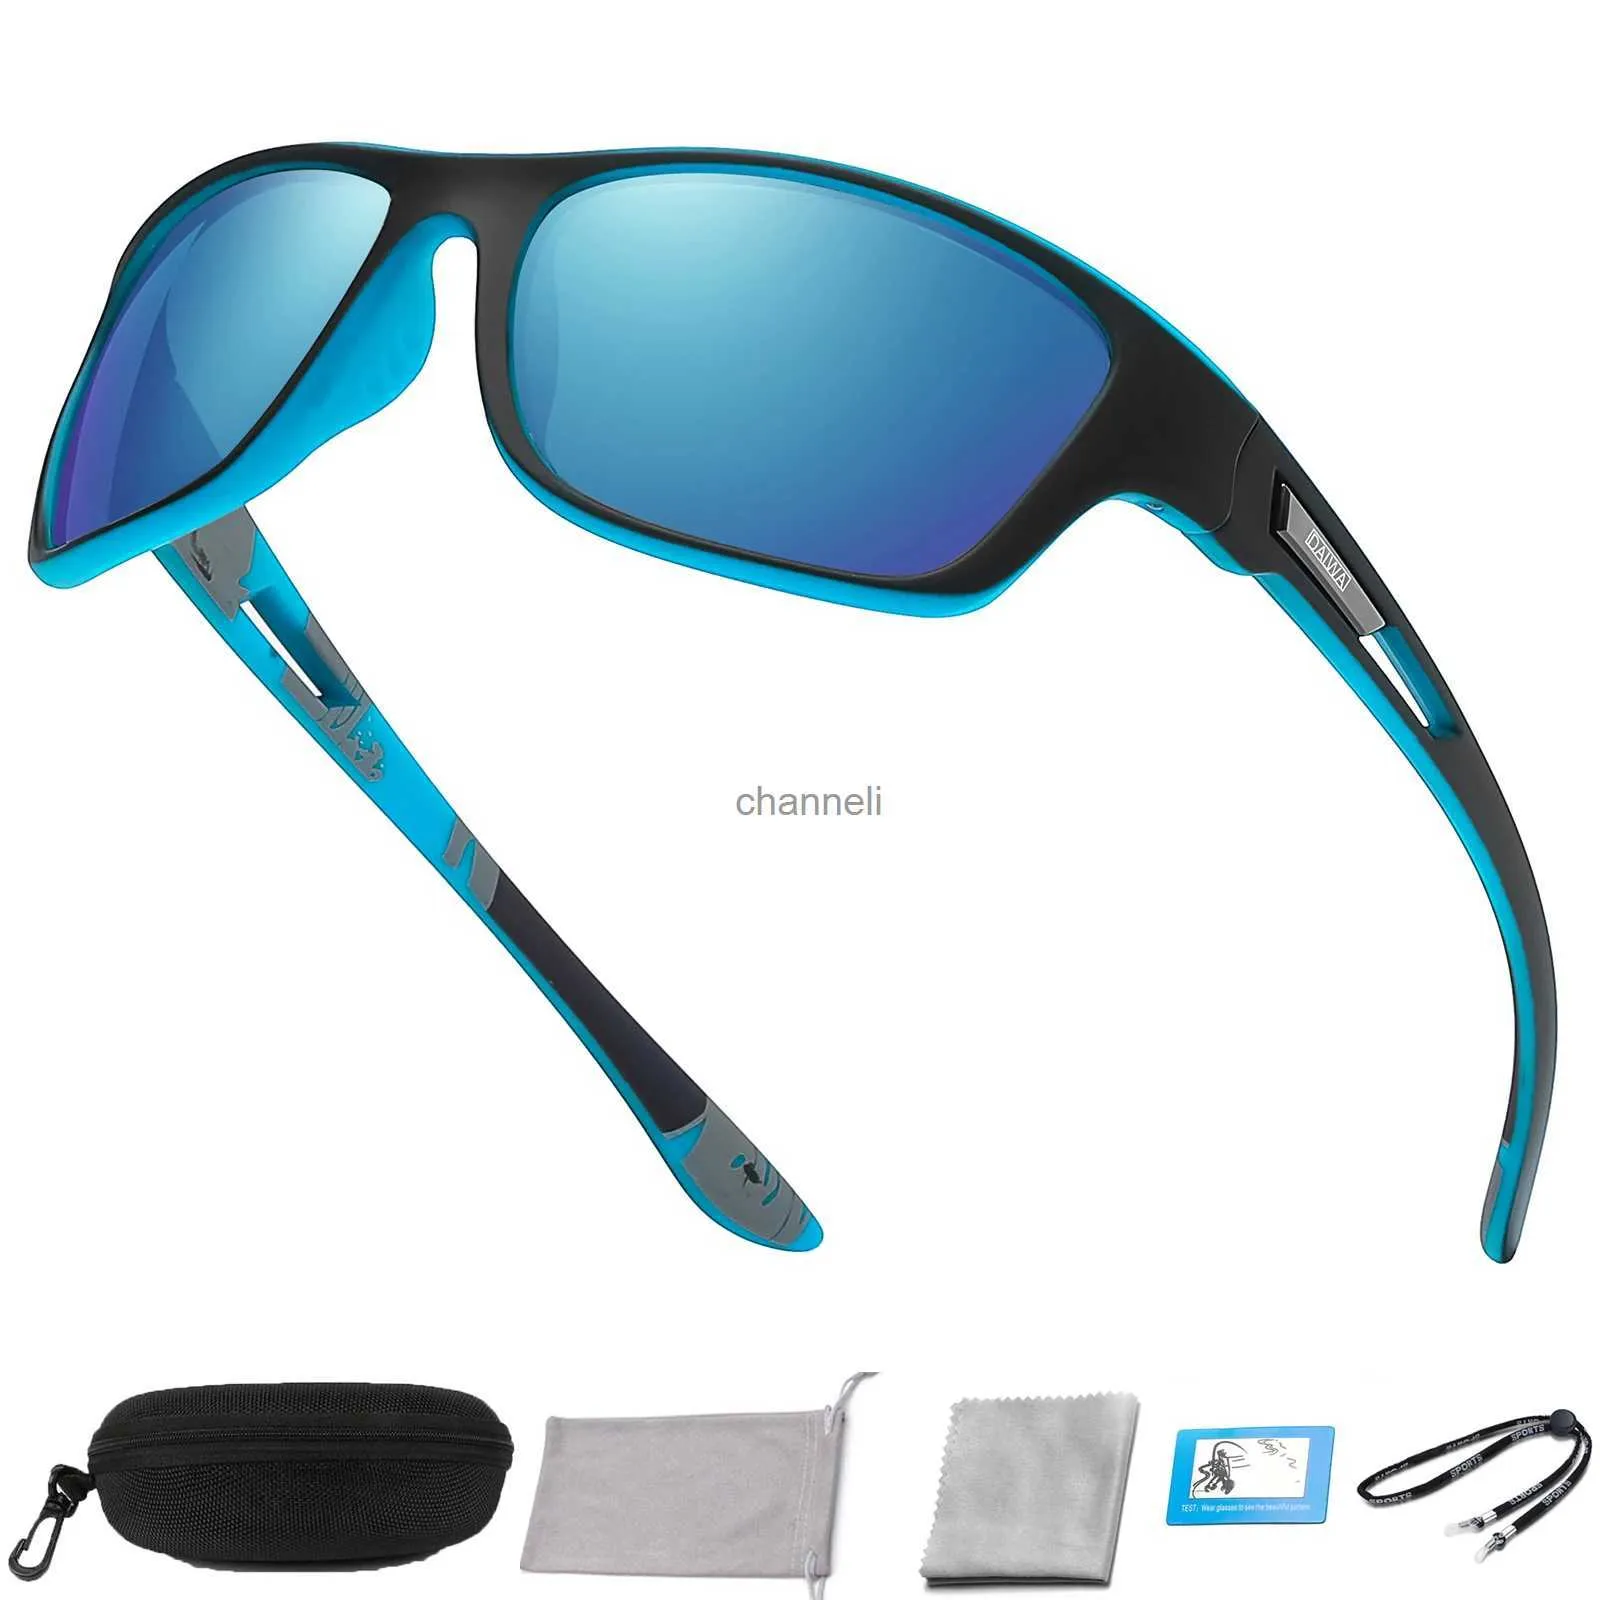 UV400 Polarized Sunglasses For Men Stylish Hiking & Driving Shades With Box  YQ231208 From Channeli, $10.17